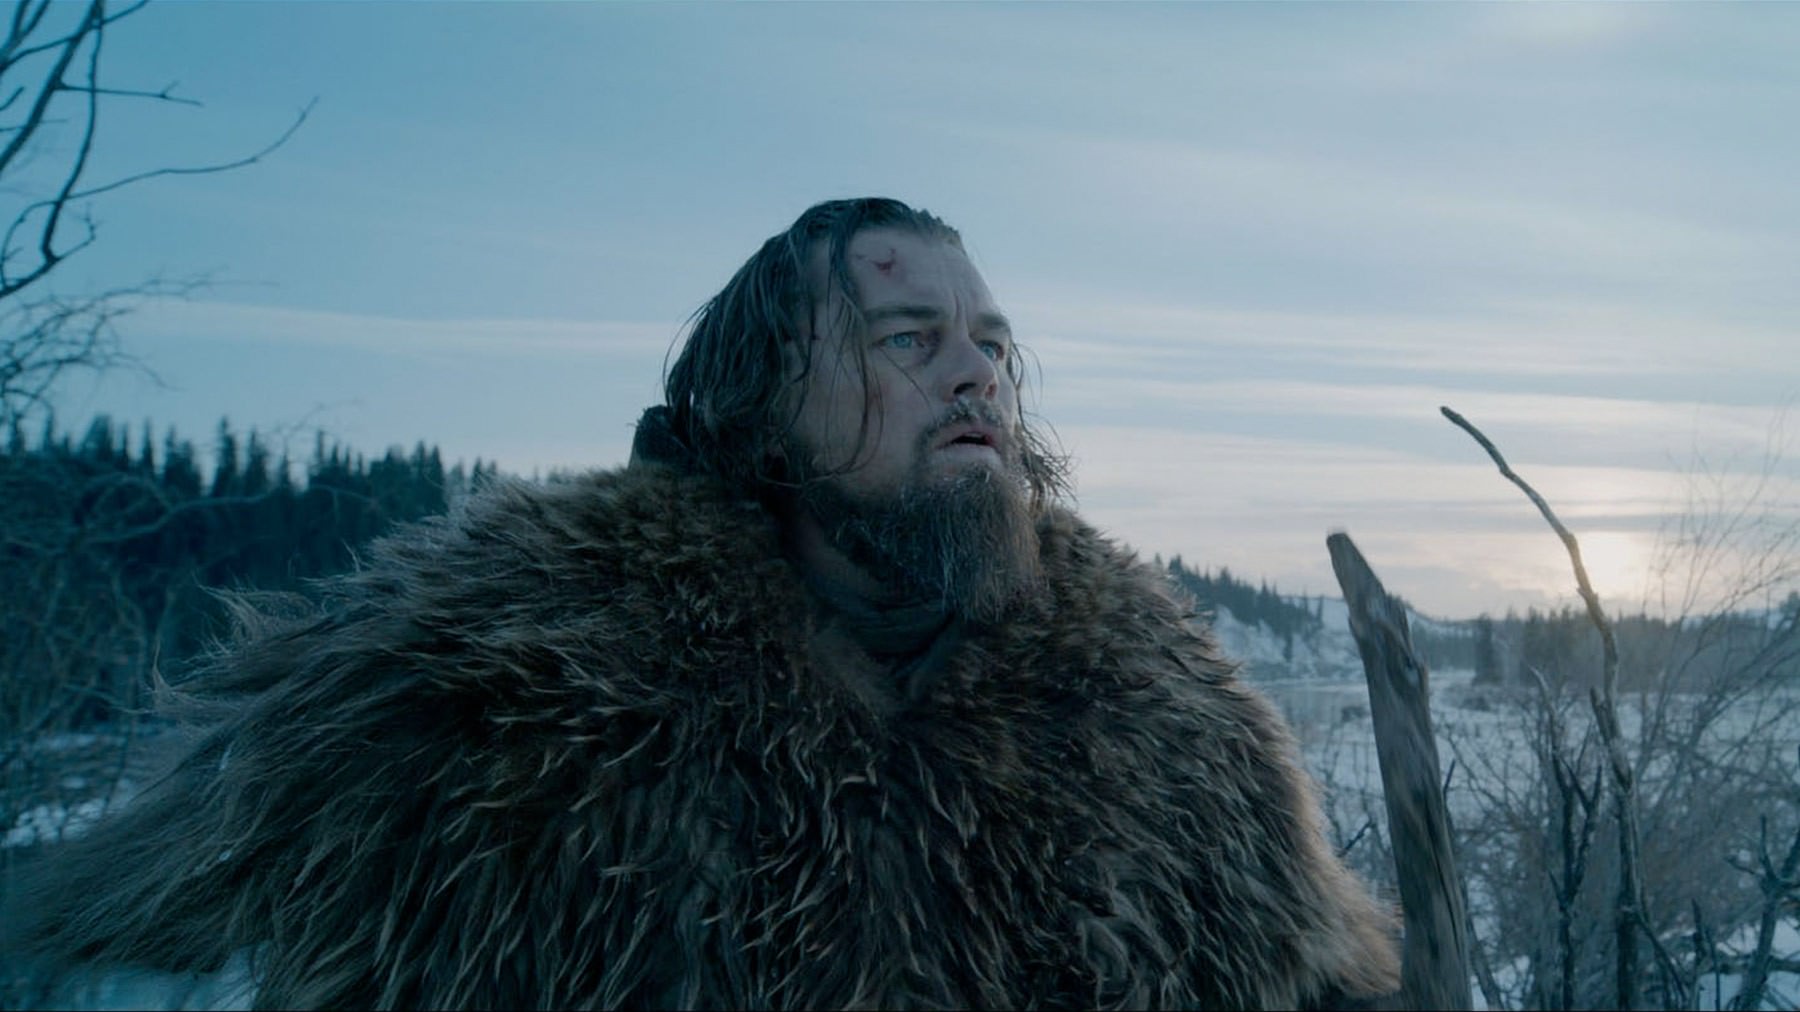 Leonardo DiCaprio Has Revealed The Lengths He Went To Acting In The Revenant. What Other Actors Have Gone To Insane Lengths While Filming?